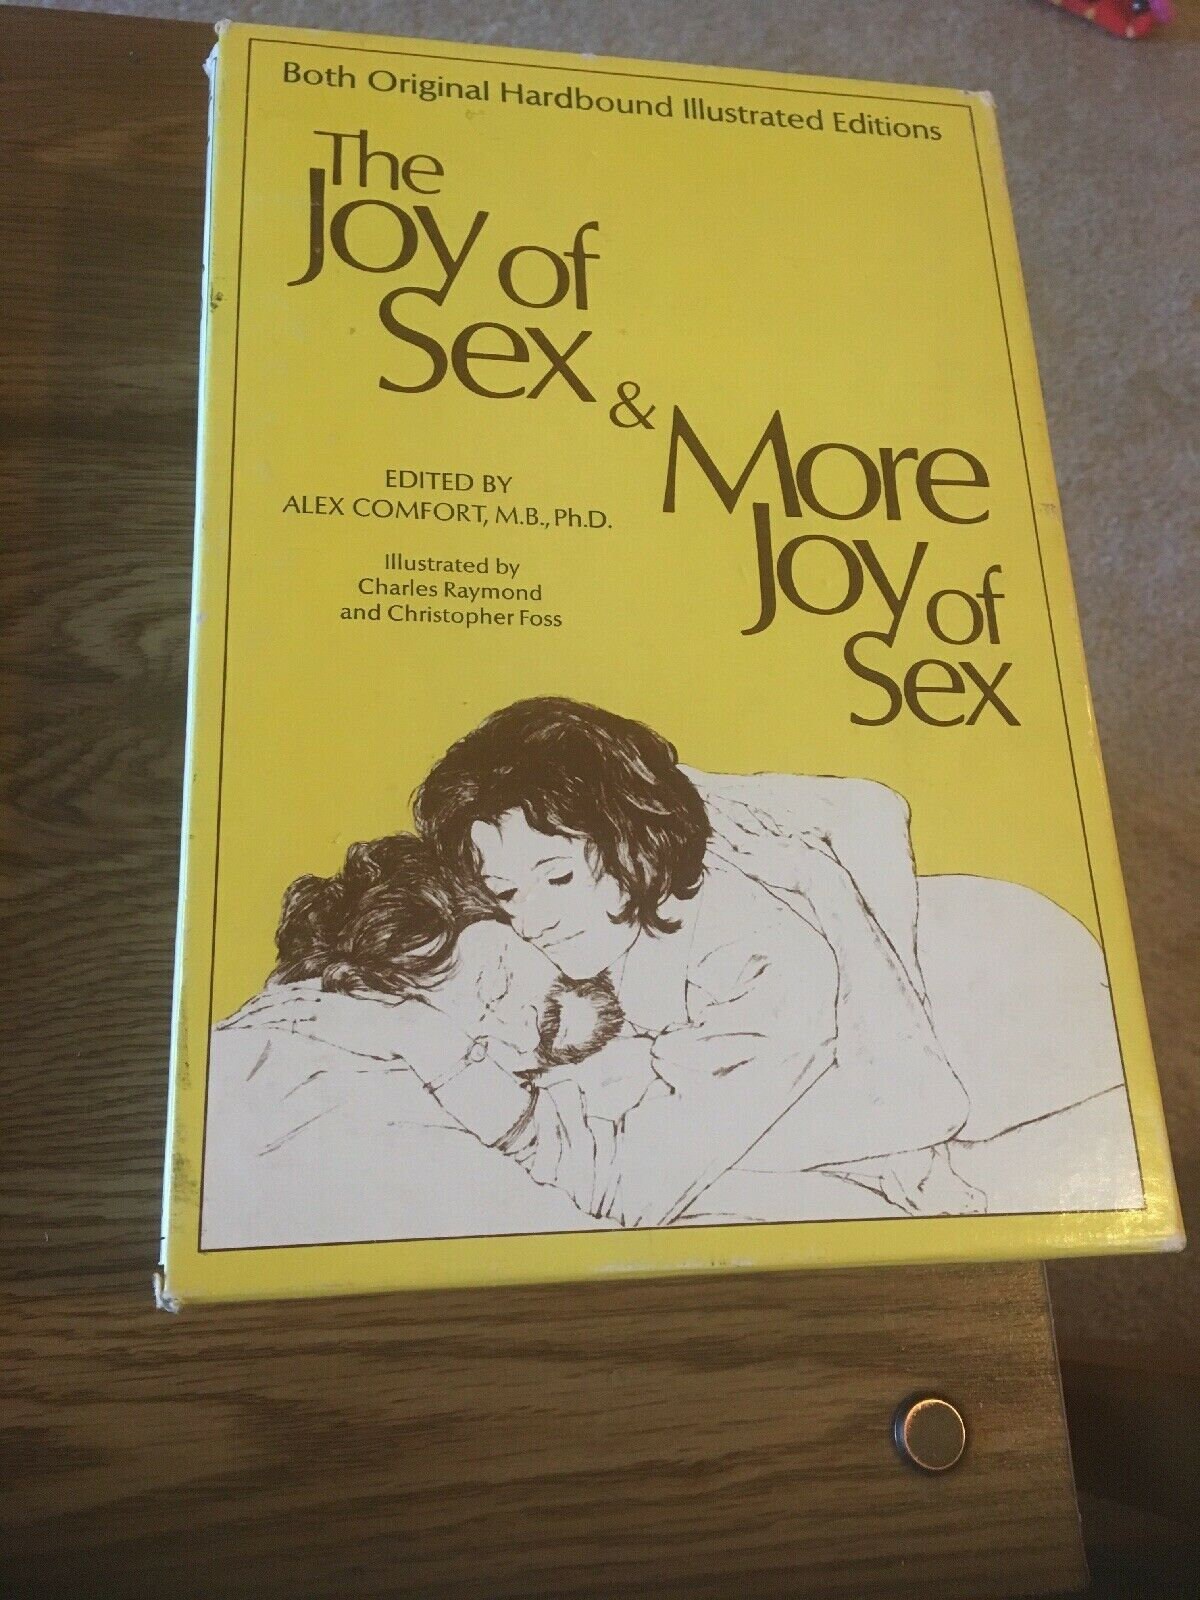 donna m curtis recommends the joy of sex book pictures pic